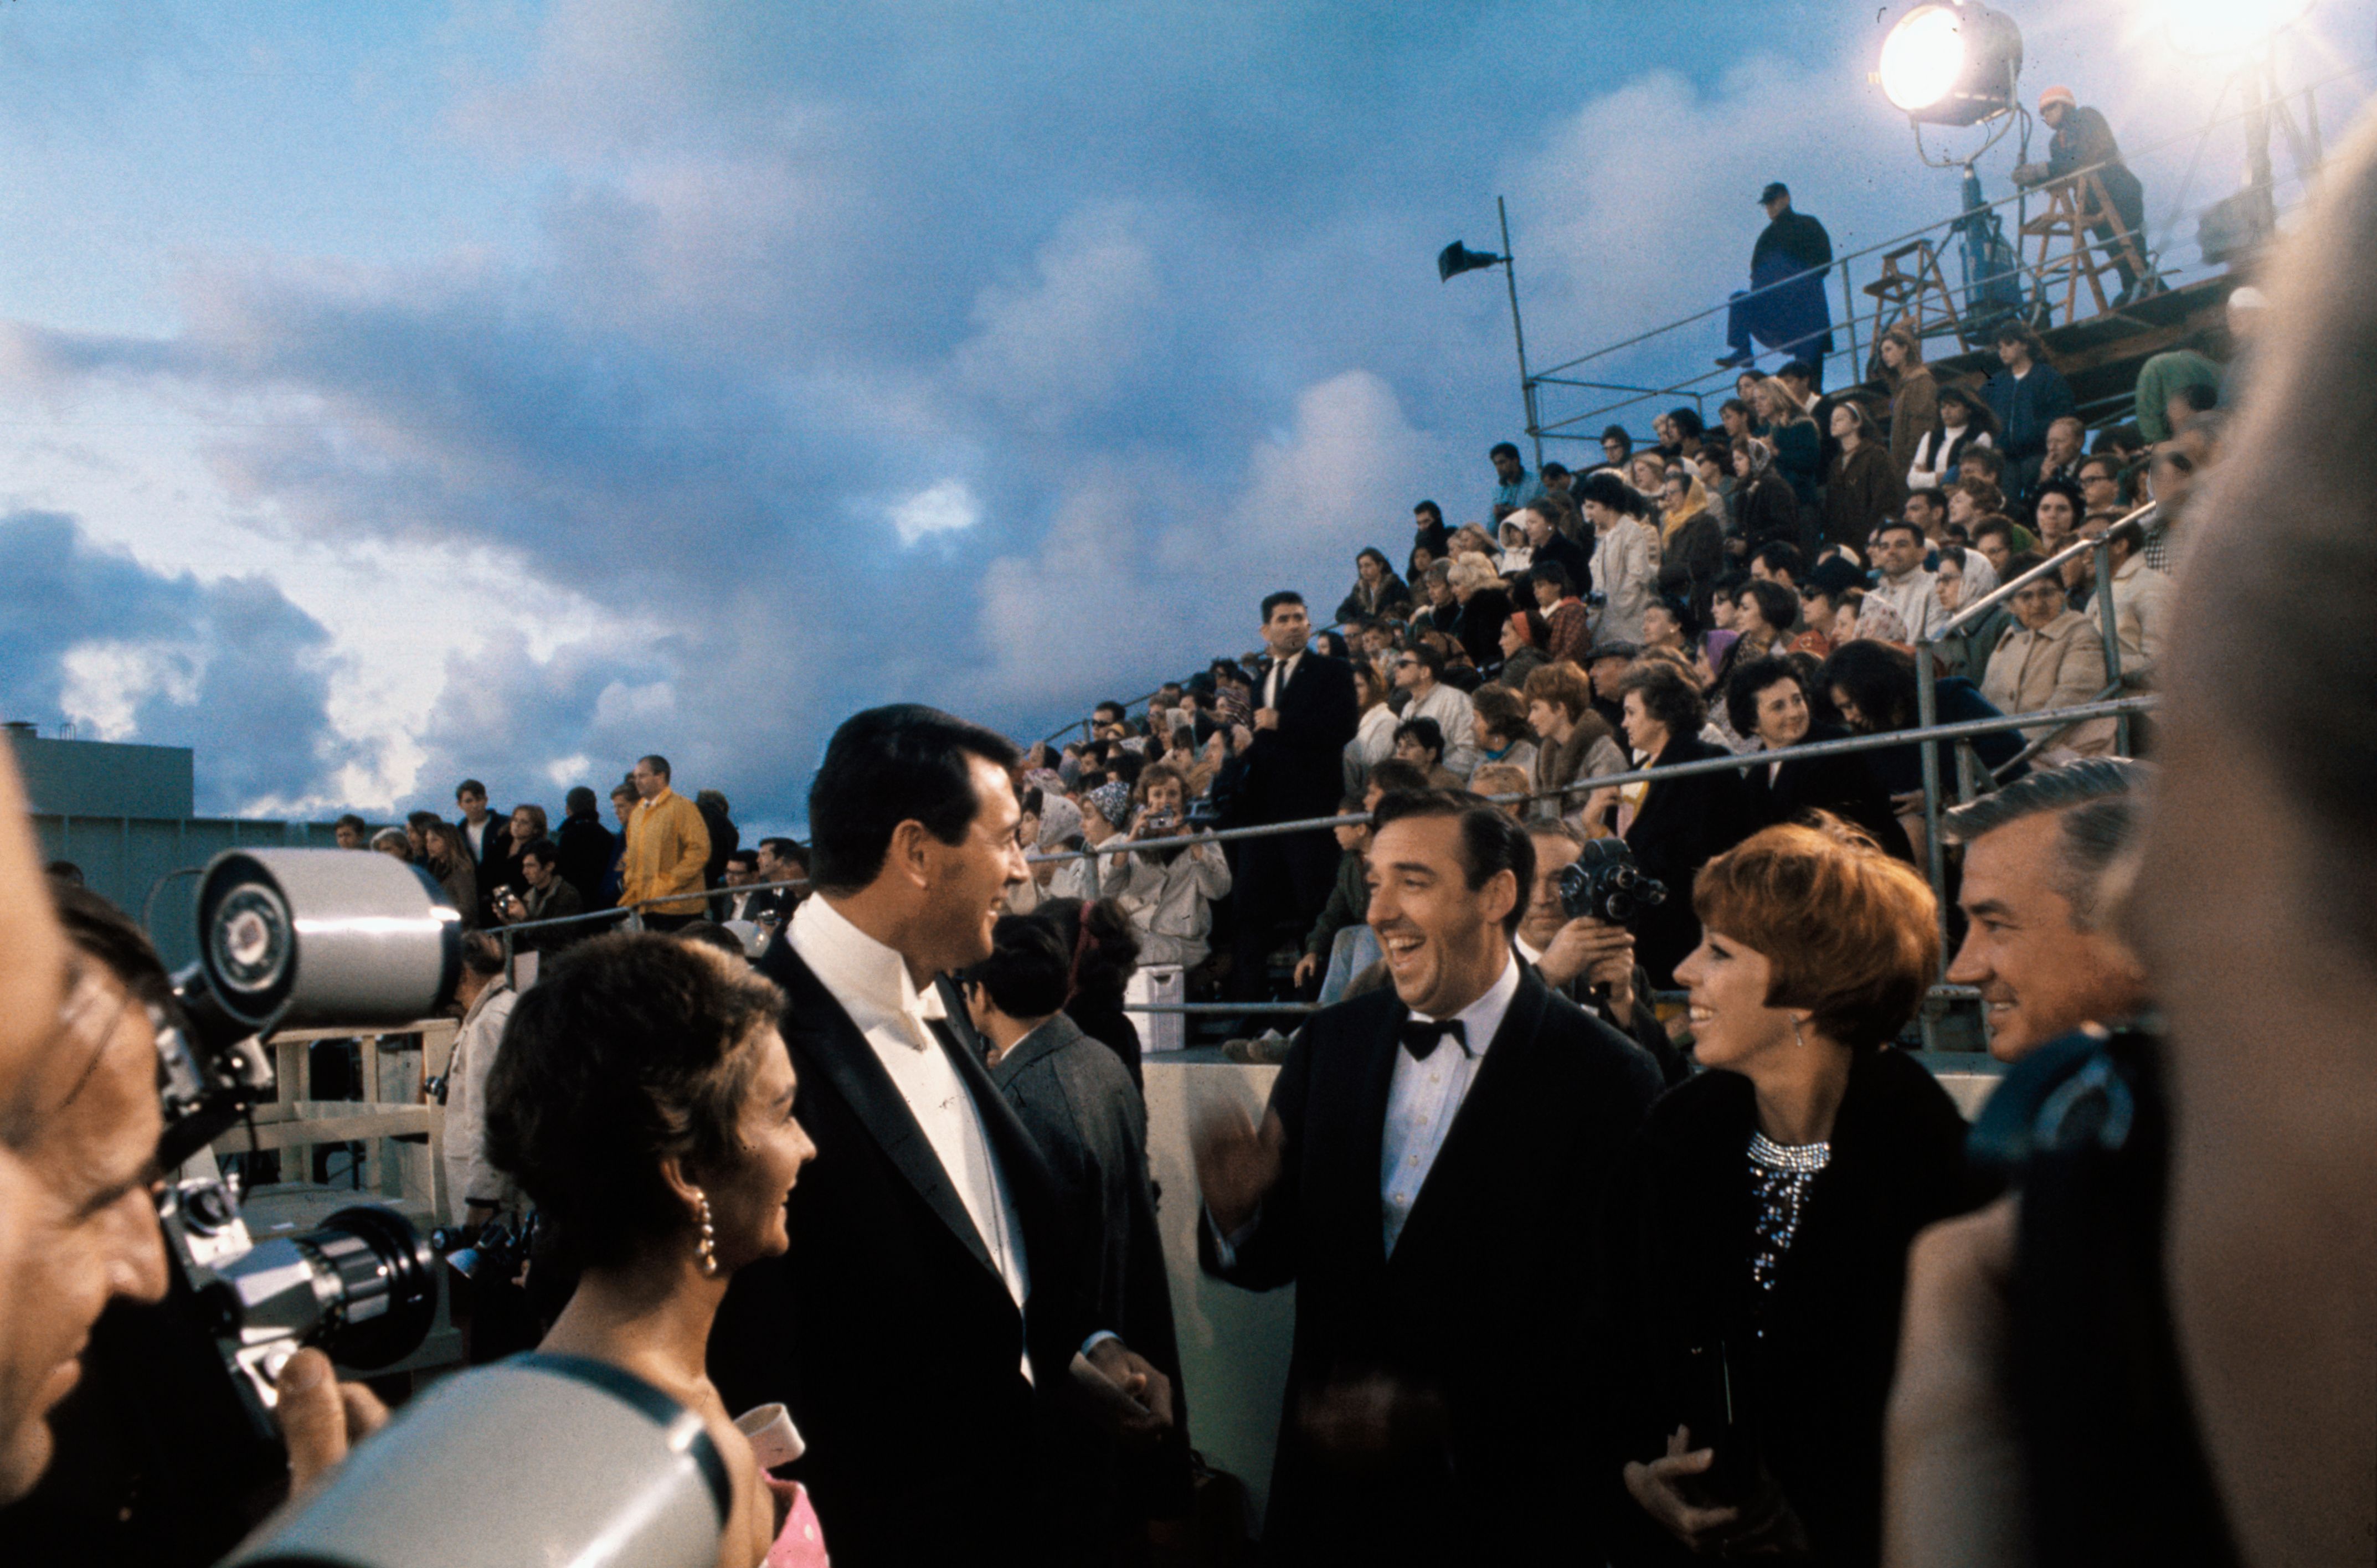 Carol Burnett with Jim Nabors and Rock Hudson at the Academy Awards on April 10, 1967. | Source: Bettman/Getty Images